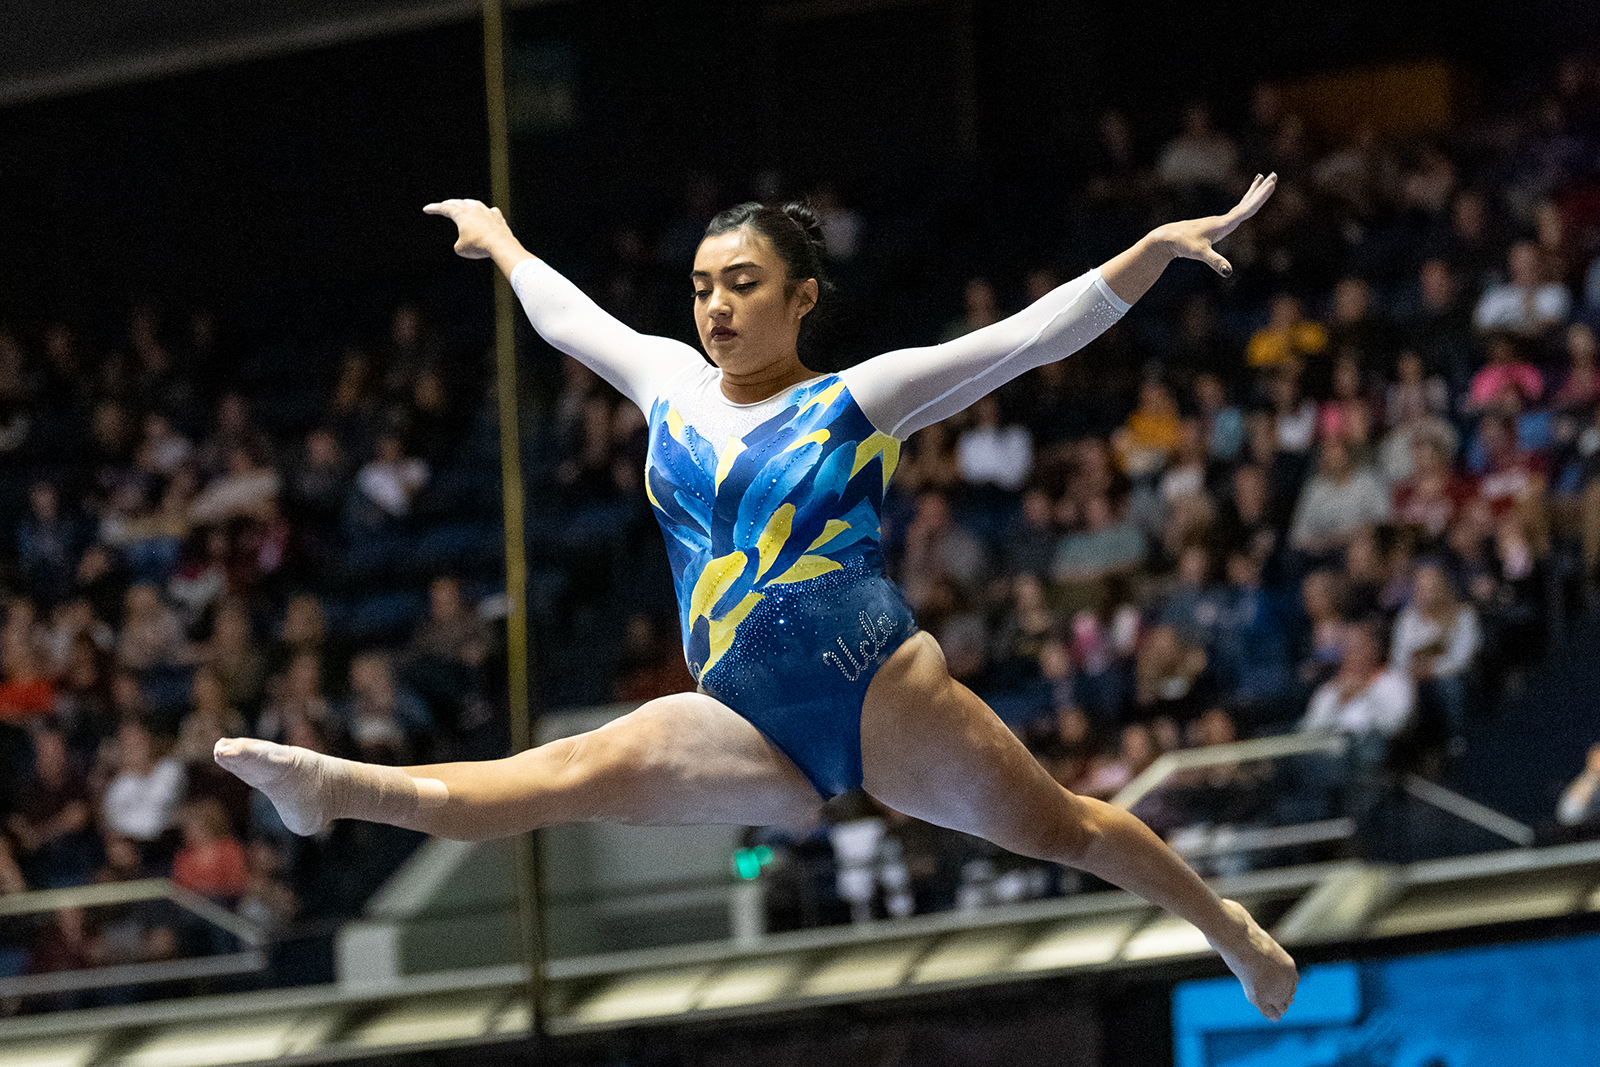 UCLA gymnastics hopes to keep up momentum going into meet given tight